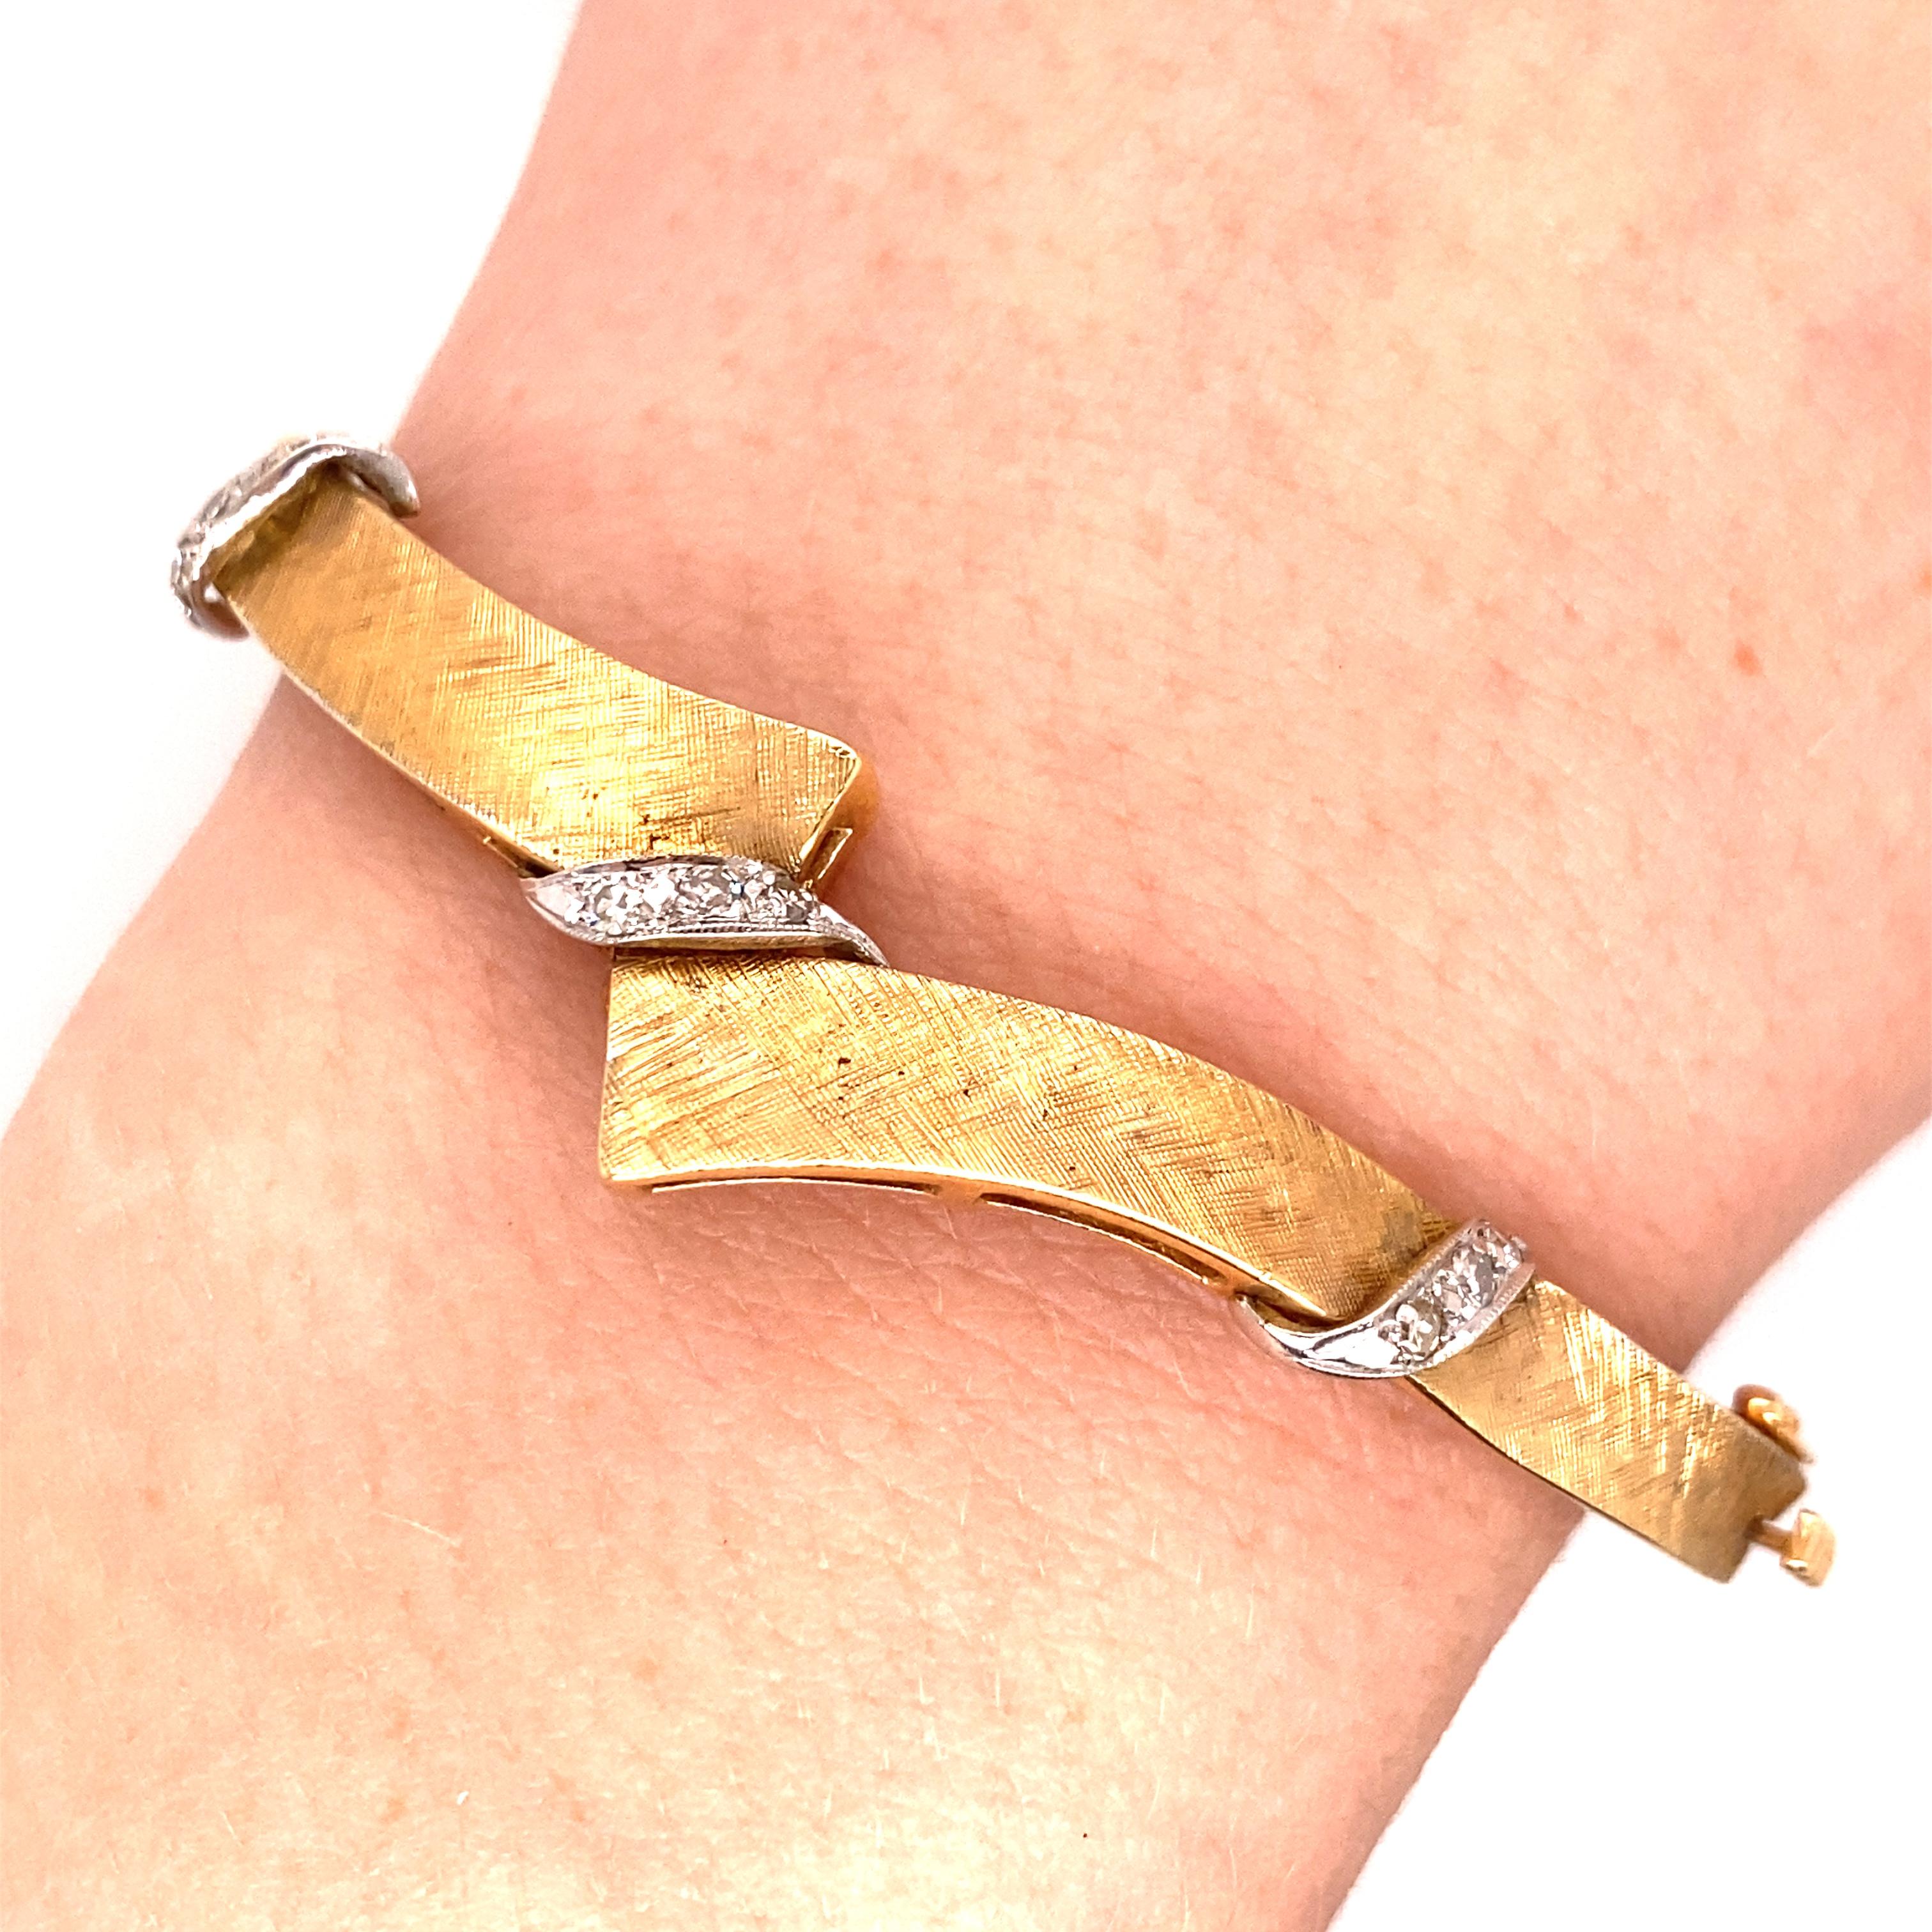 Vintage 1950's 14K Yellow Gold Bangle Bracelet with Diamond Accents - The bangle has a brushed finish with 3 white gold ribbon accents containing 3 single cut diamonds in each. The total weight is approximately .25ct with G - J color and VS clarity.